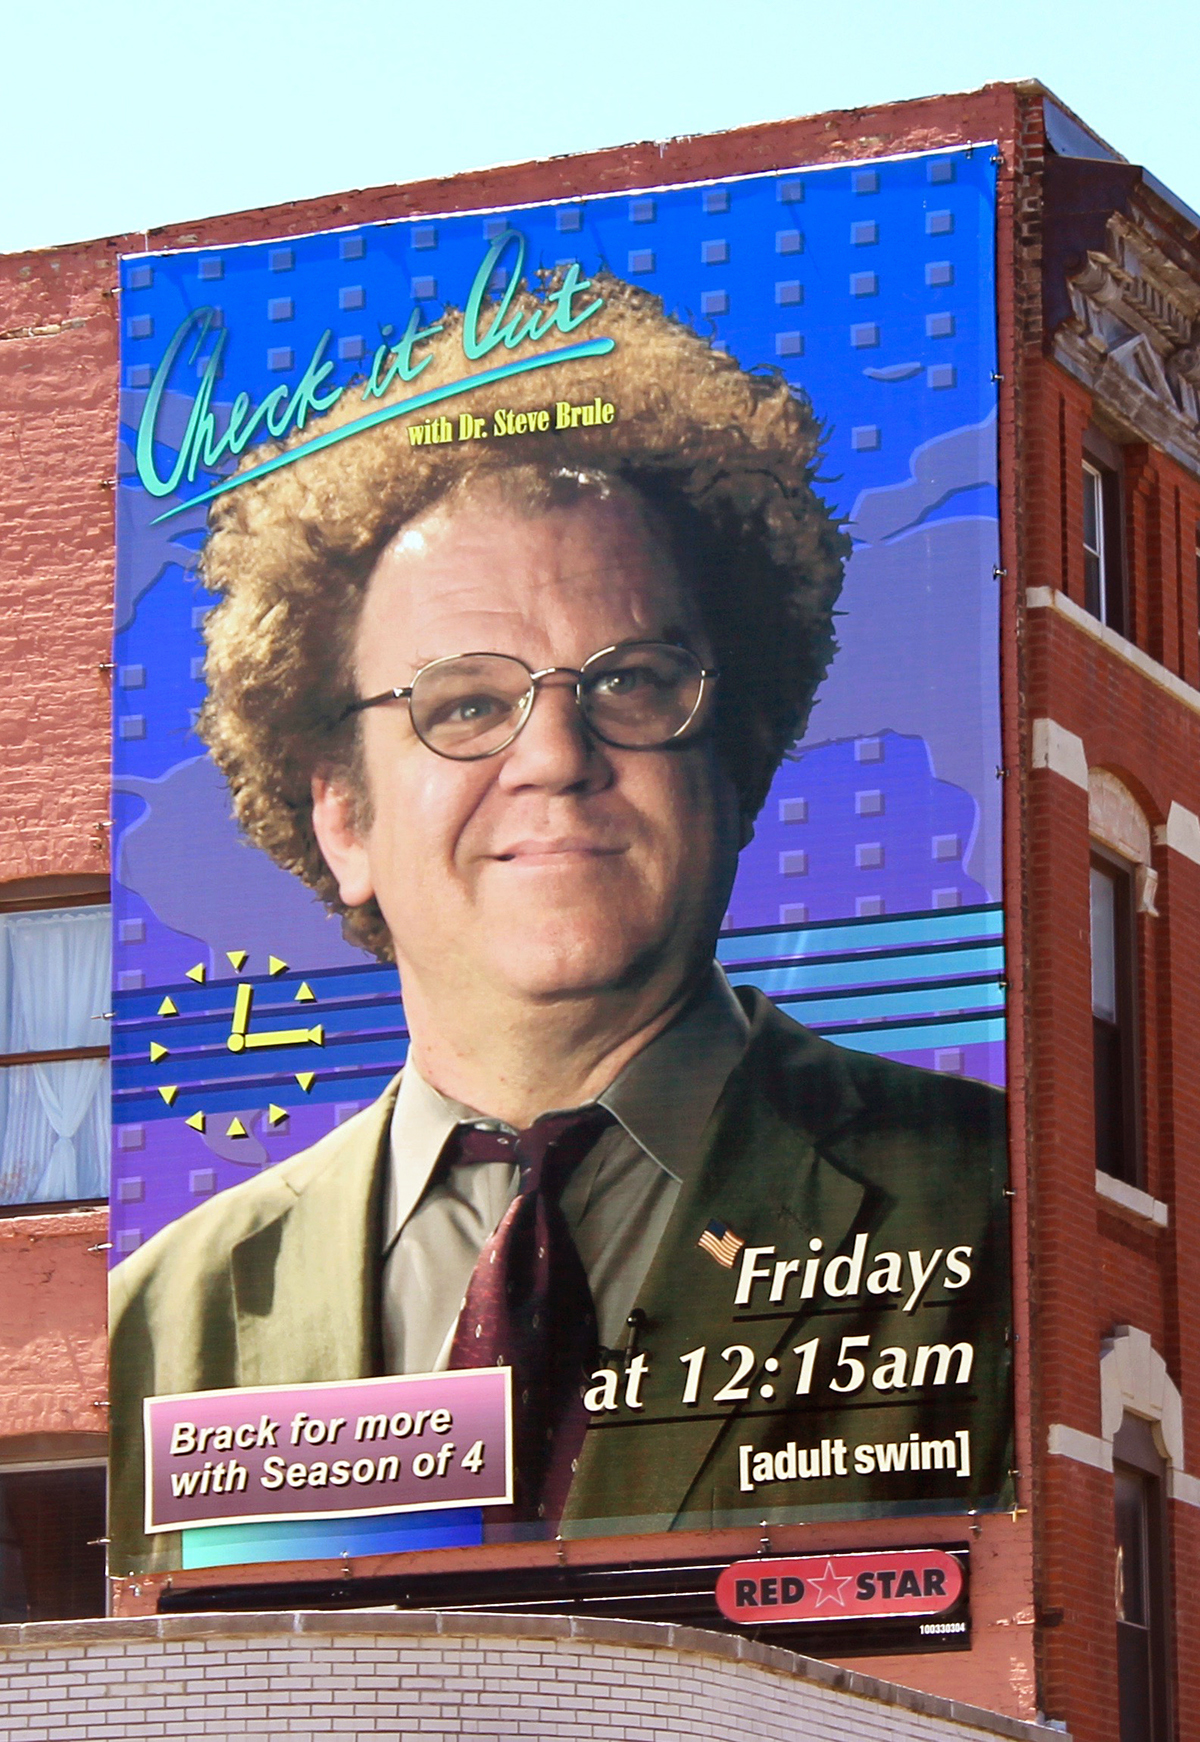 steve brule check it out Check It Out! Adult Swim billboard Mural Outdoor outdoor advertising News Graphics Retro color colorful gradient